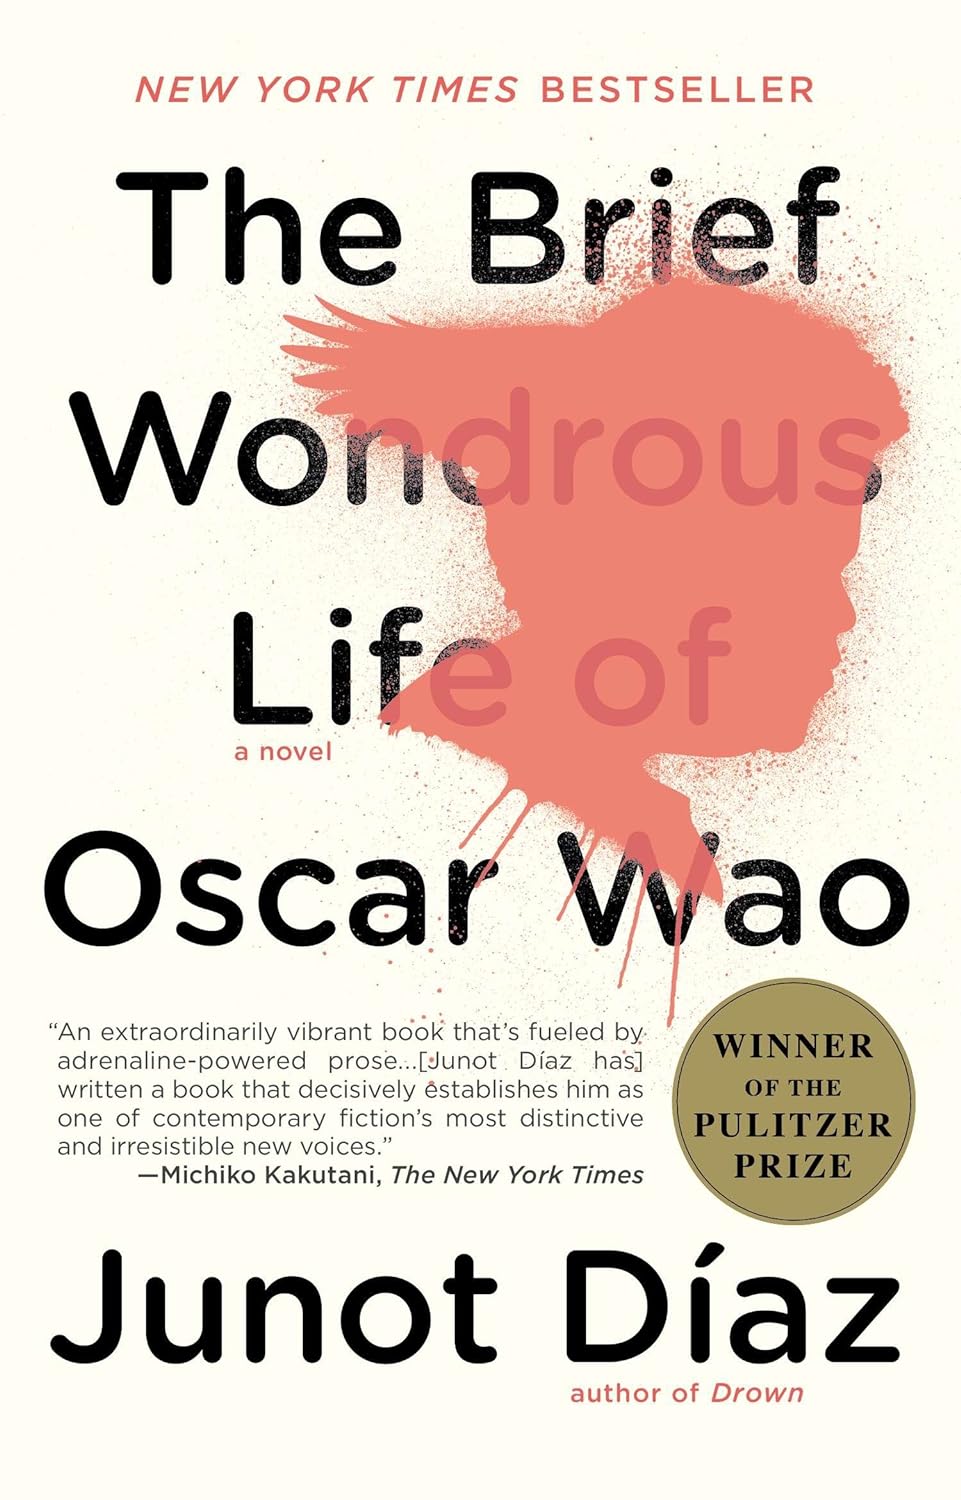 The Brief Wondrous Life of Oscar Wao by Junot Díaz (2007)